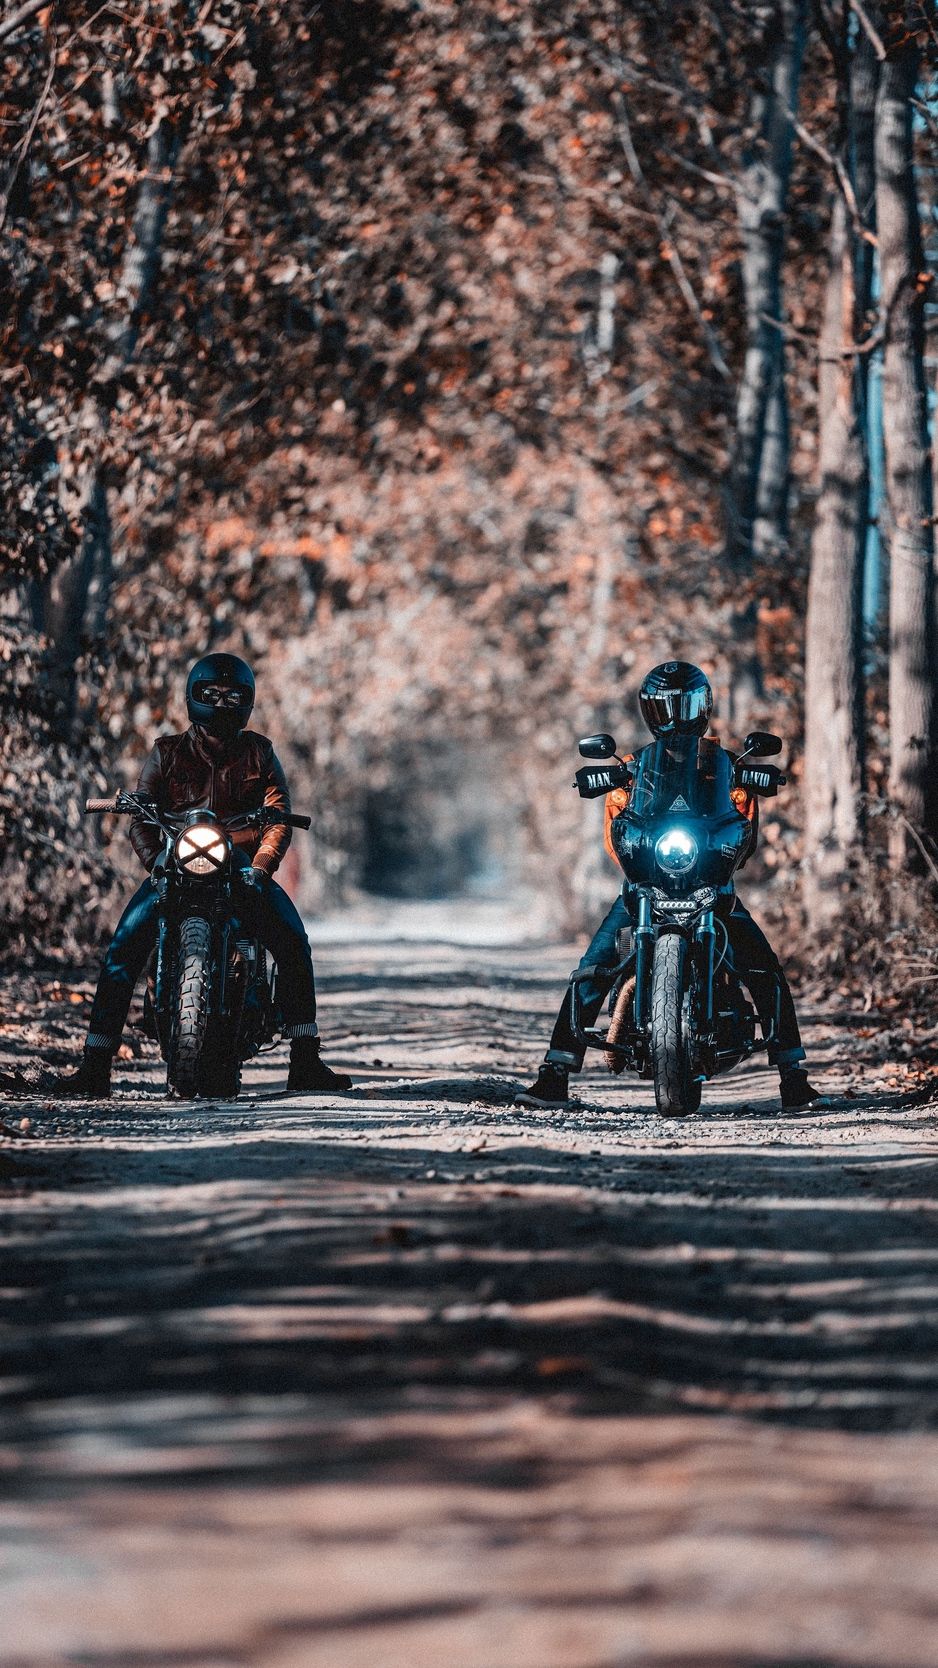 Motorcyclists, bikers, bike, motorcycle, forest